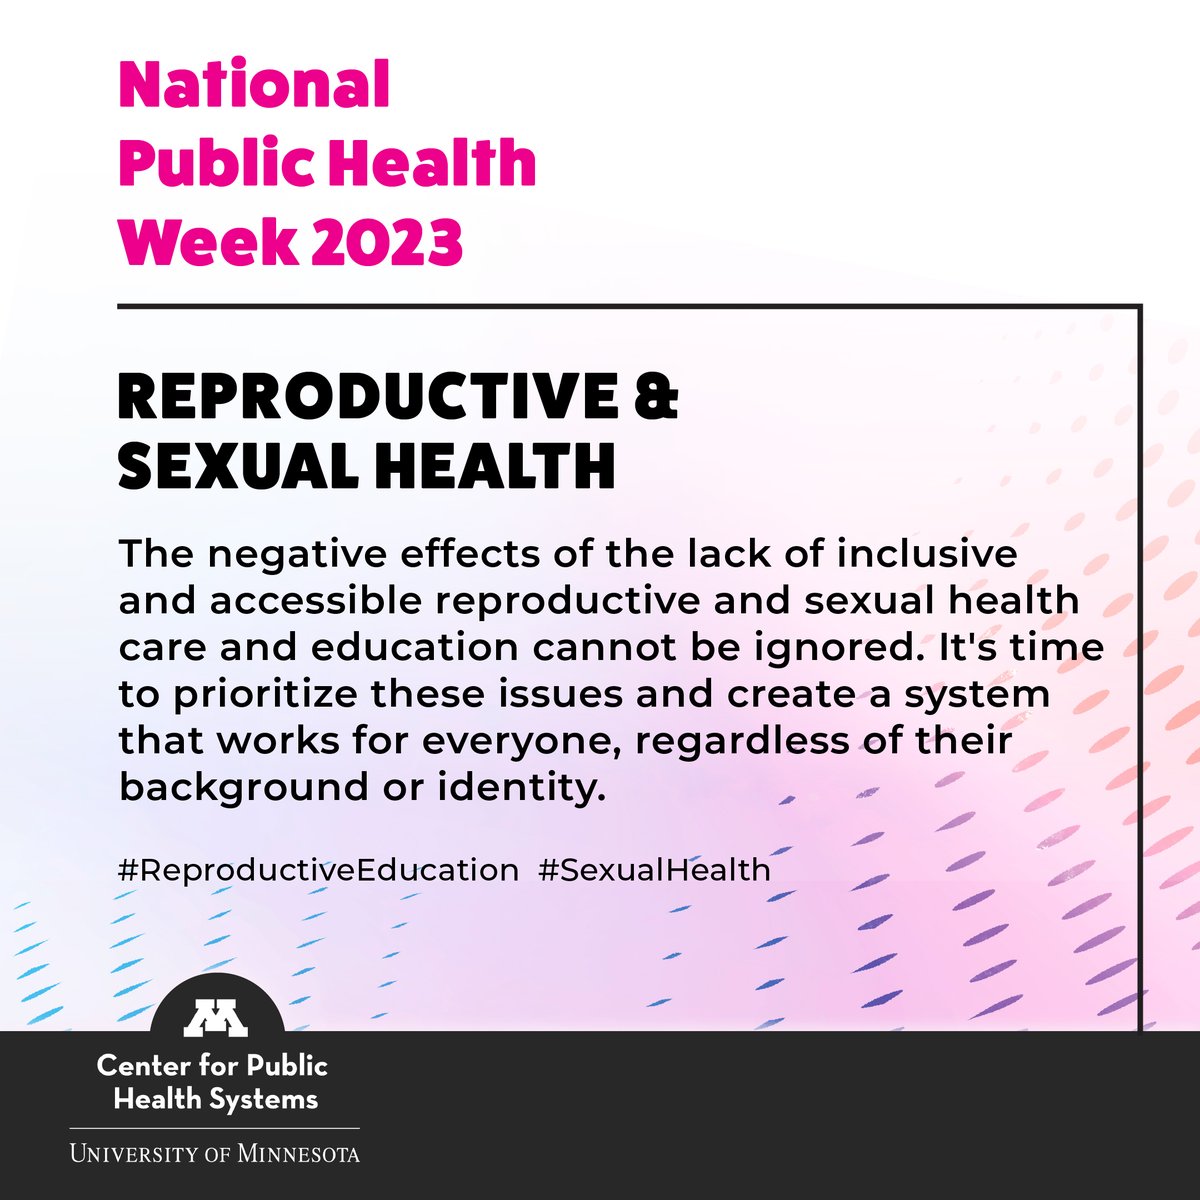 These statistics highlight the urgent need for mental health resources and support for marginalized communities.

#nphw #reproductivehealthcare #reproductivehealtheducation #sexualhealth #sexualhealthmatters #sexualhealtheducation #sexualhealthandwellness